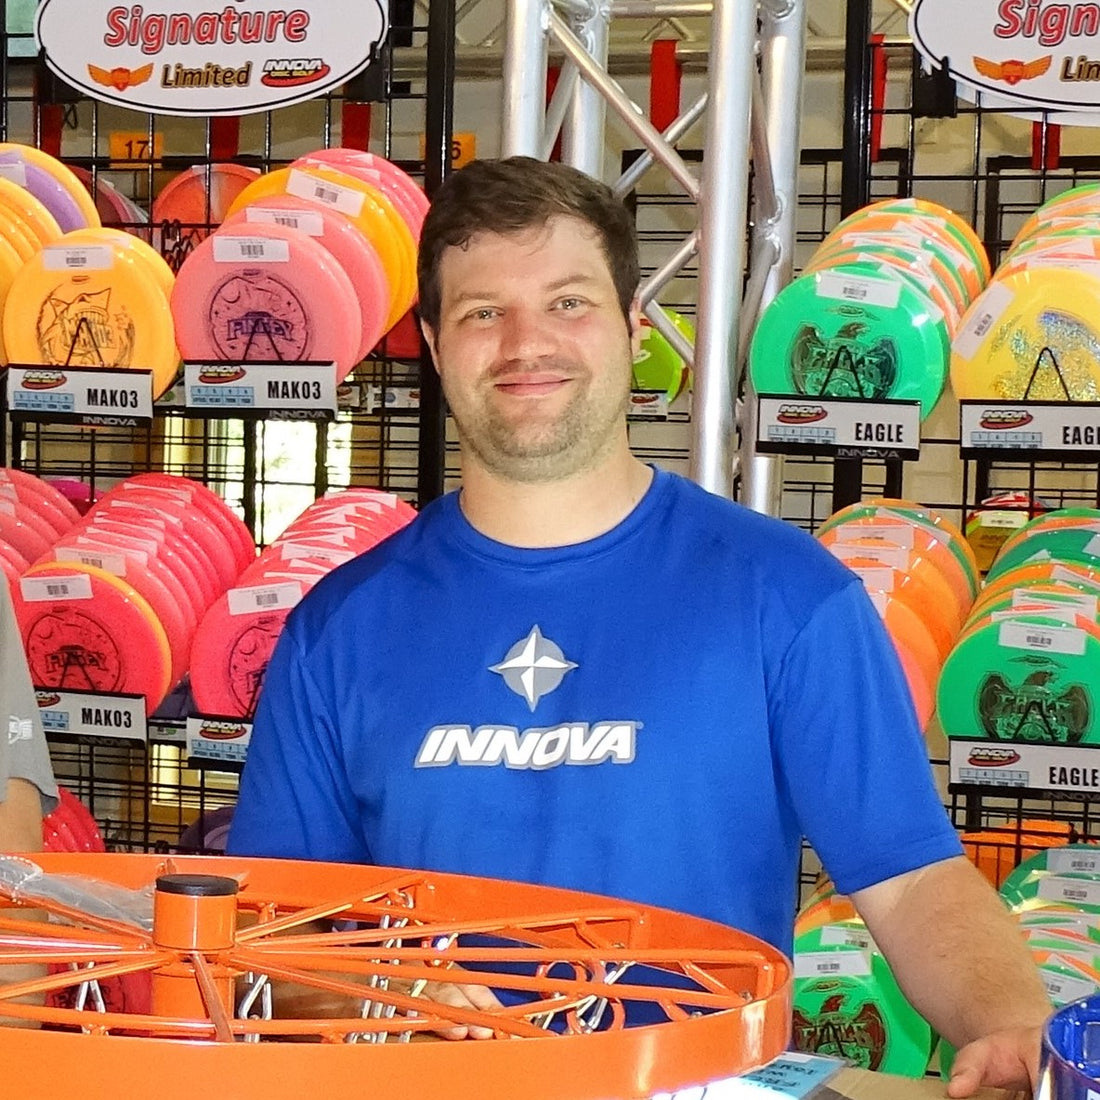 Sabattus Disc Golf blog writer and Pro Shop staff, Andrew Streeter, standing in front of a full rack of colorful discs.